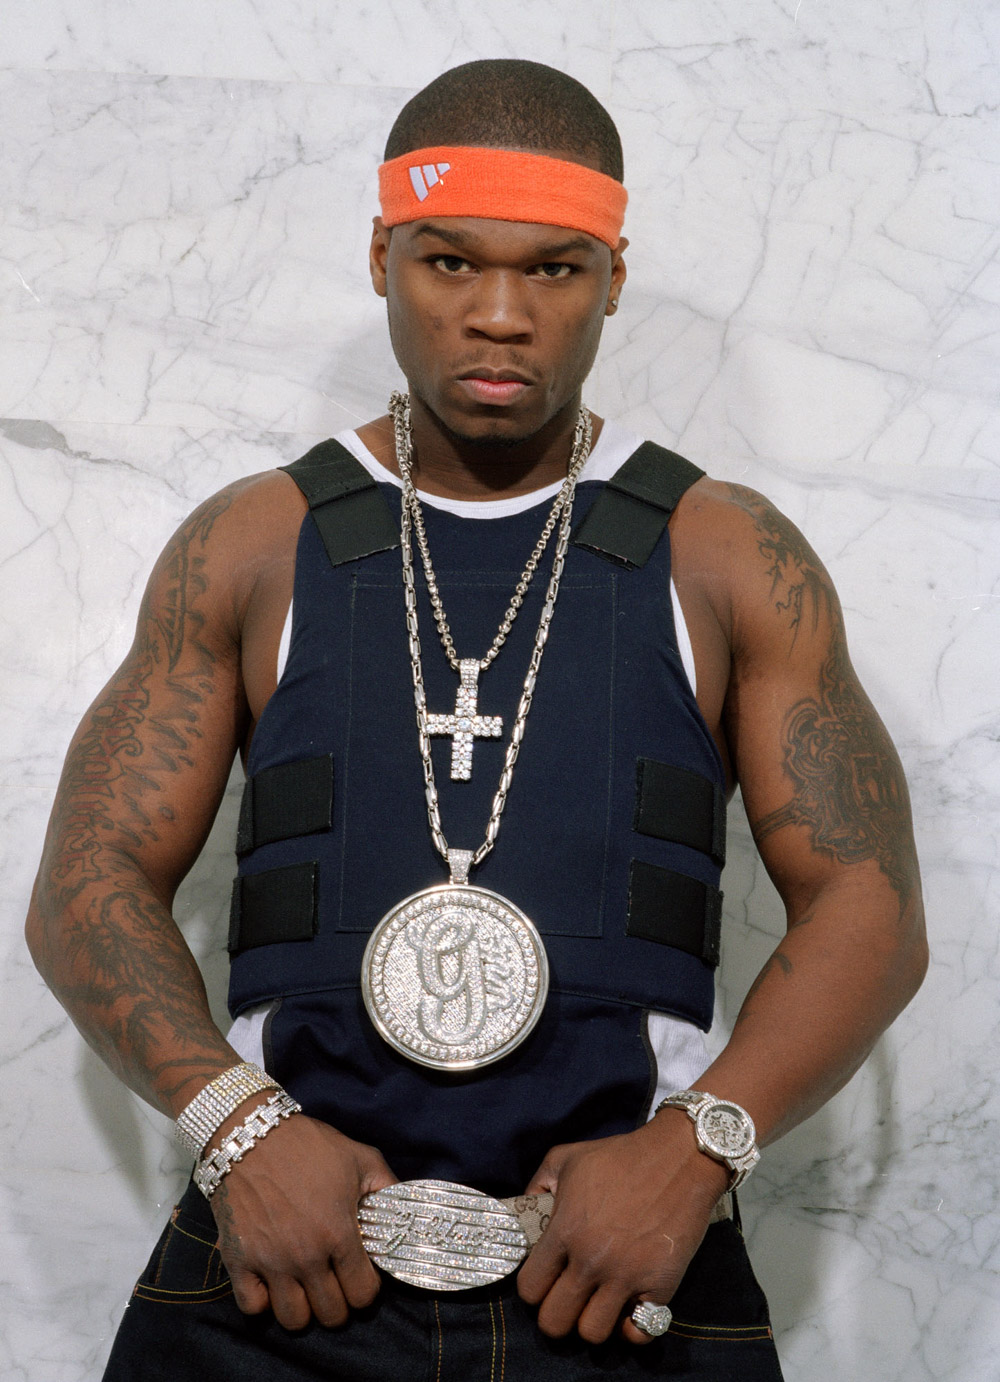 50 cent young daughter dating advice